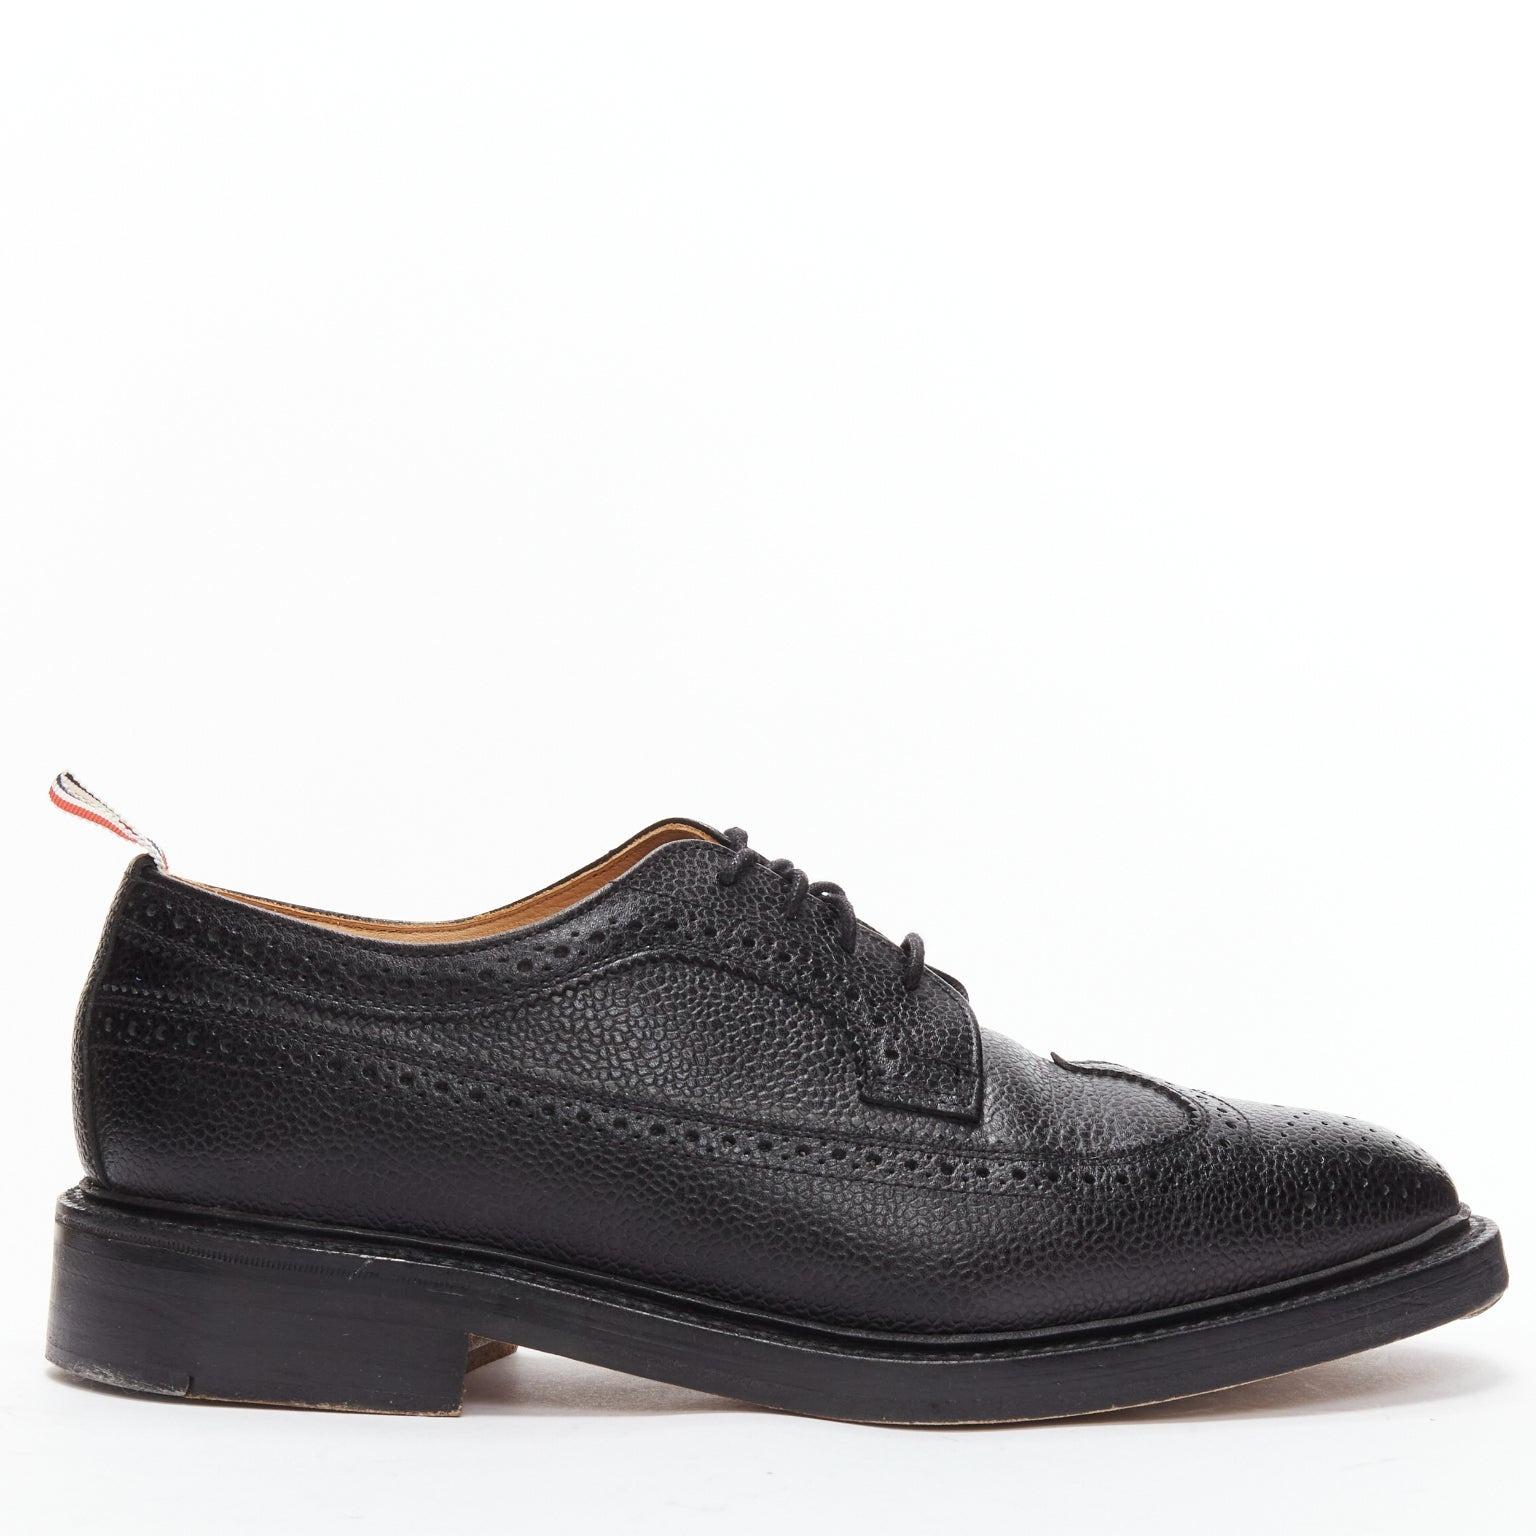 THOM BROWNE black grained leather perforated oxford brogue shoes EU42.5
Reference: JSLE/A00092
Brand: Thom Browne
Designer: Thom Browne
Material: Leather
Color: Black, Multicolour
Pattern: Striped
Closure: Lace Up
Lining: Nude Leather
Extra Details: